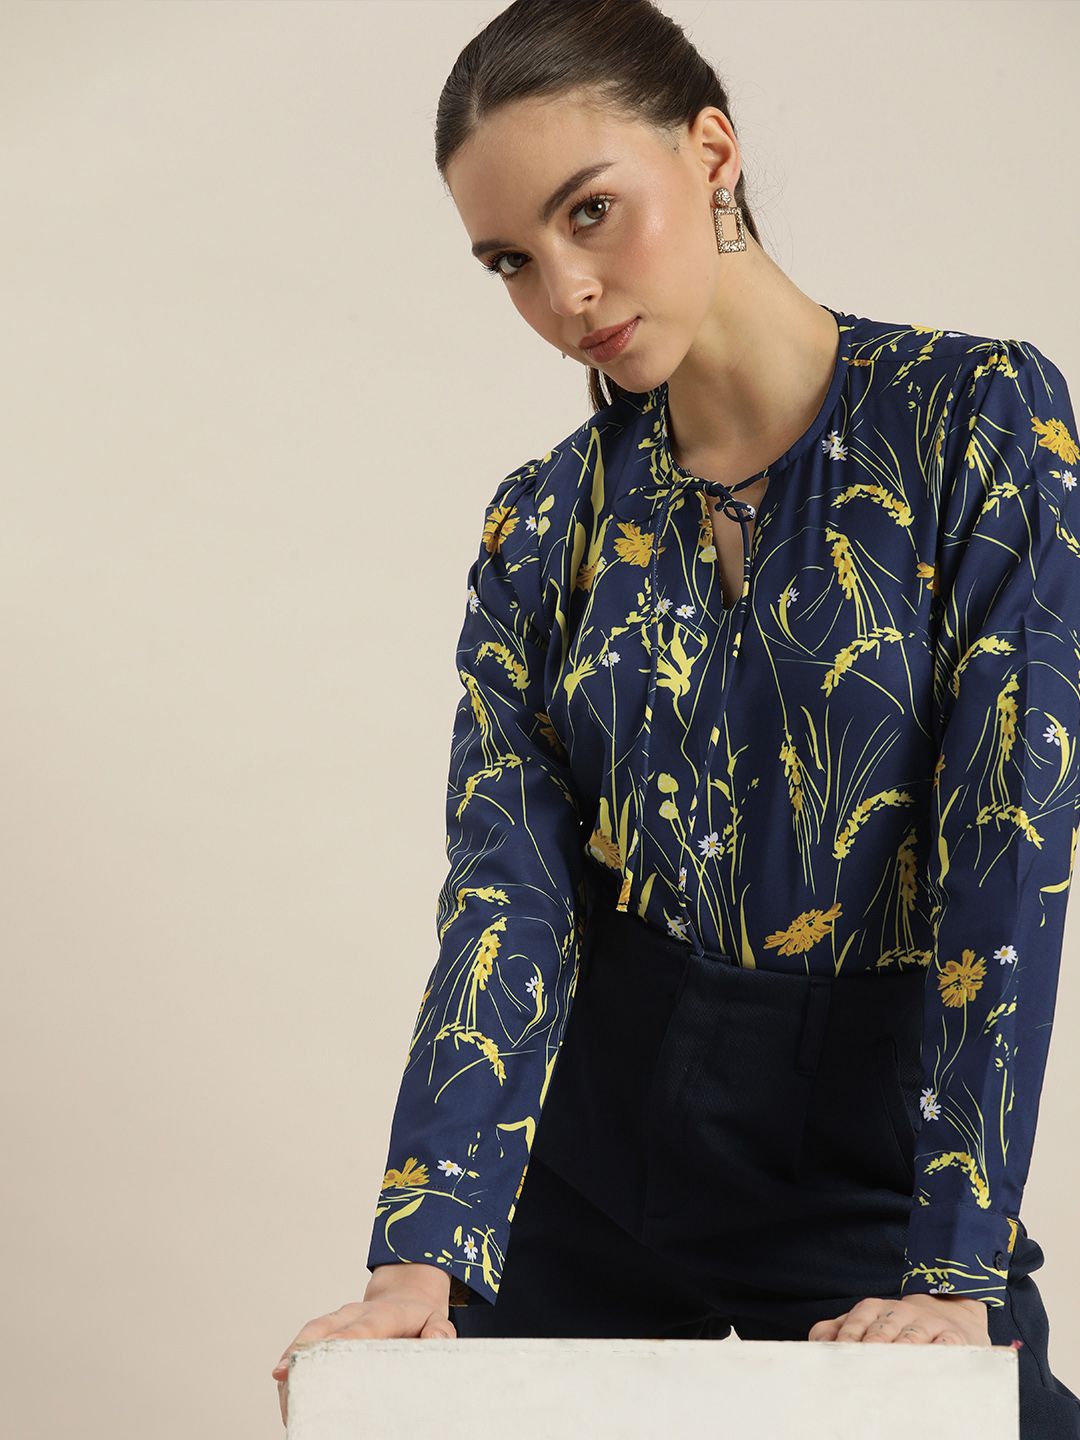 encore by INVICTUS Blue & Yellow Floral Print Tie-Up Neck Top Price in India